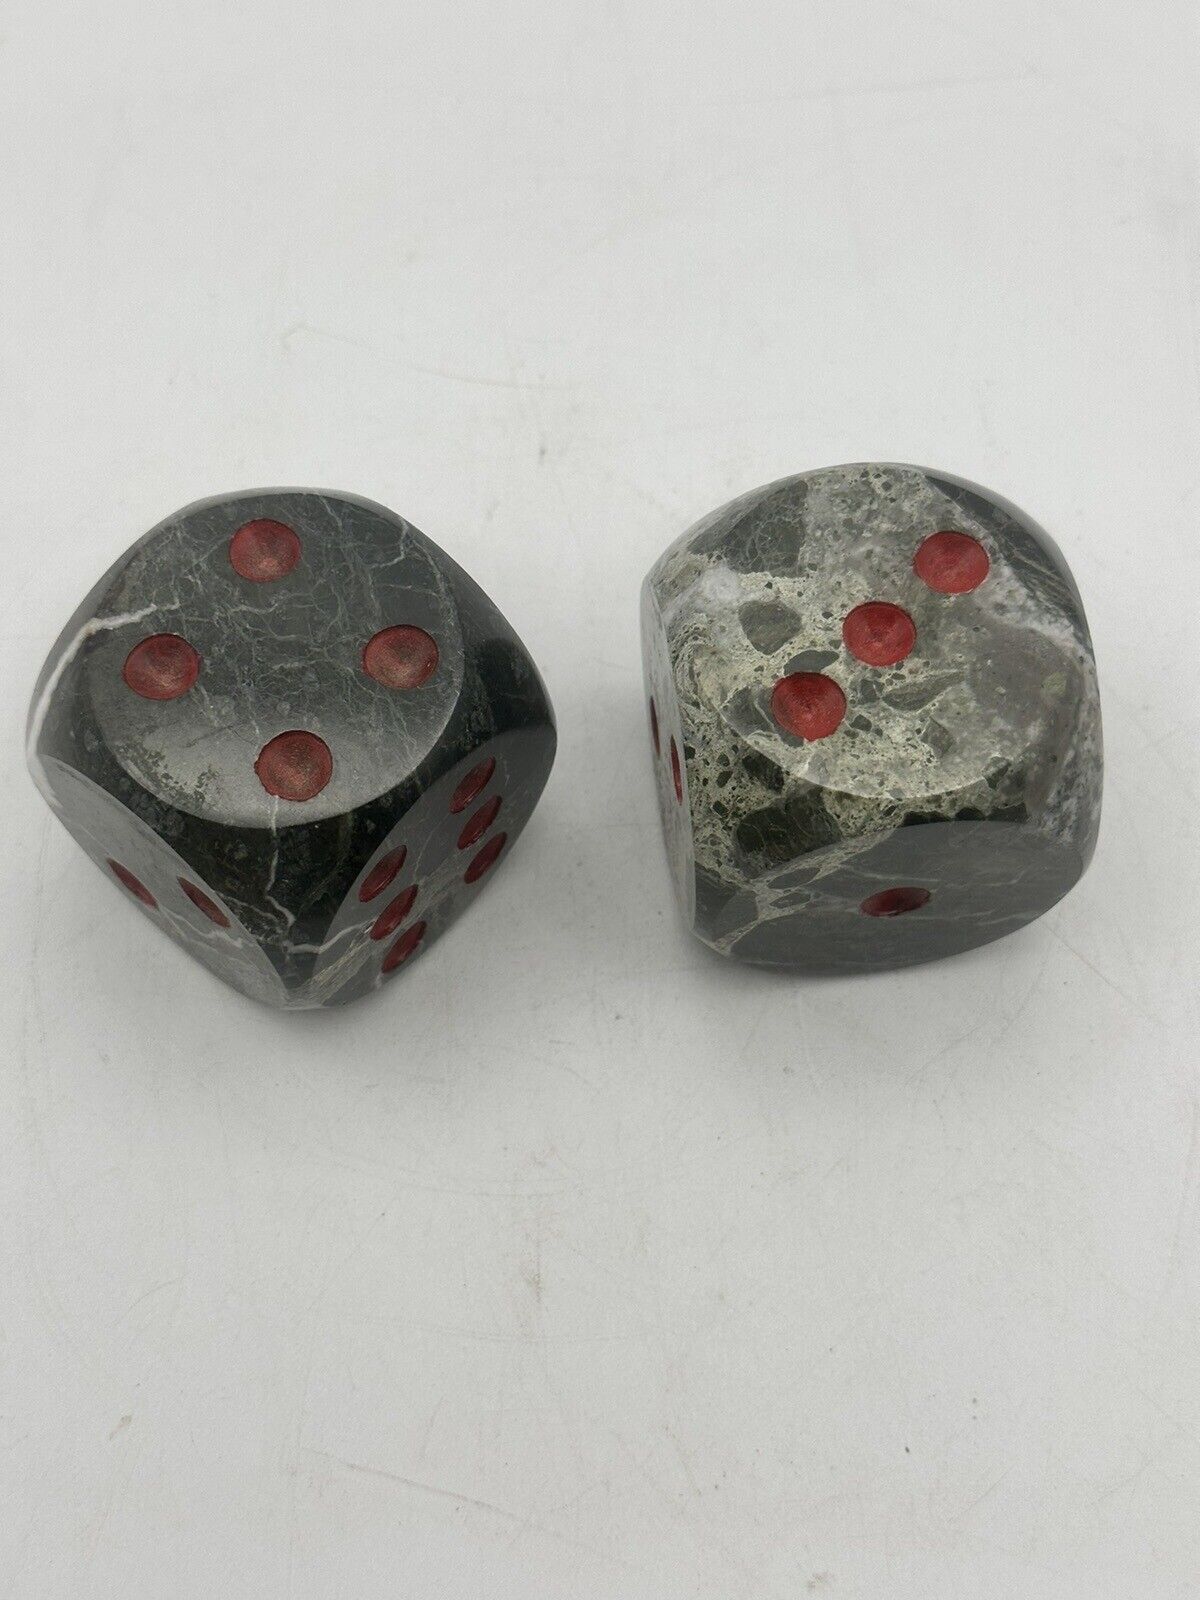 Paperweight 2” Set Of 2 Black Zebra Jasper Dice With Red Painted Number Pips